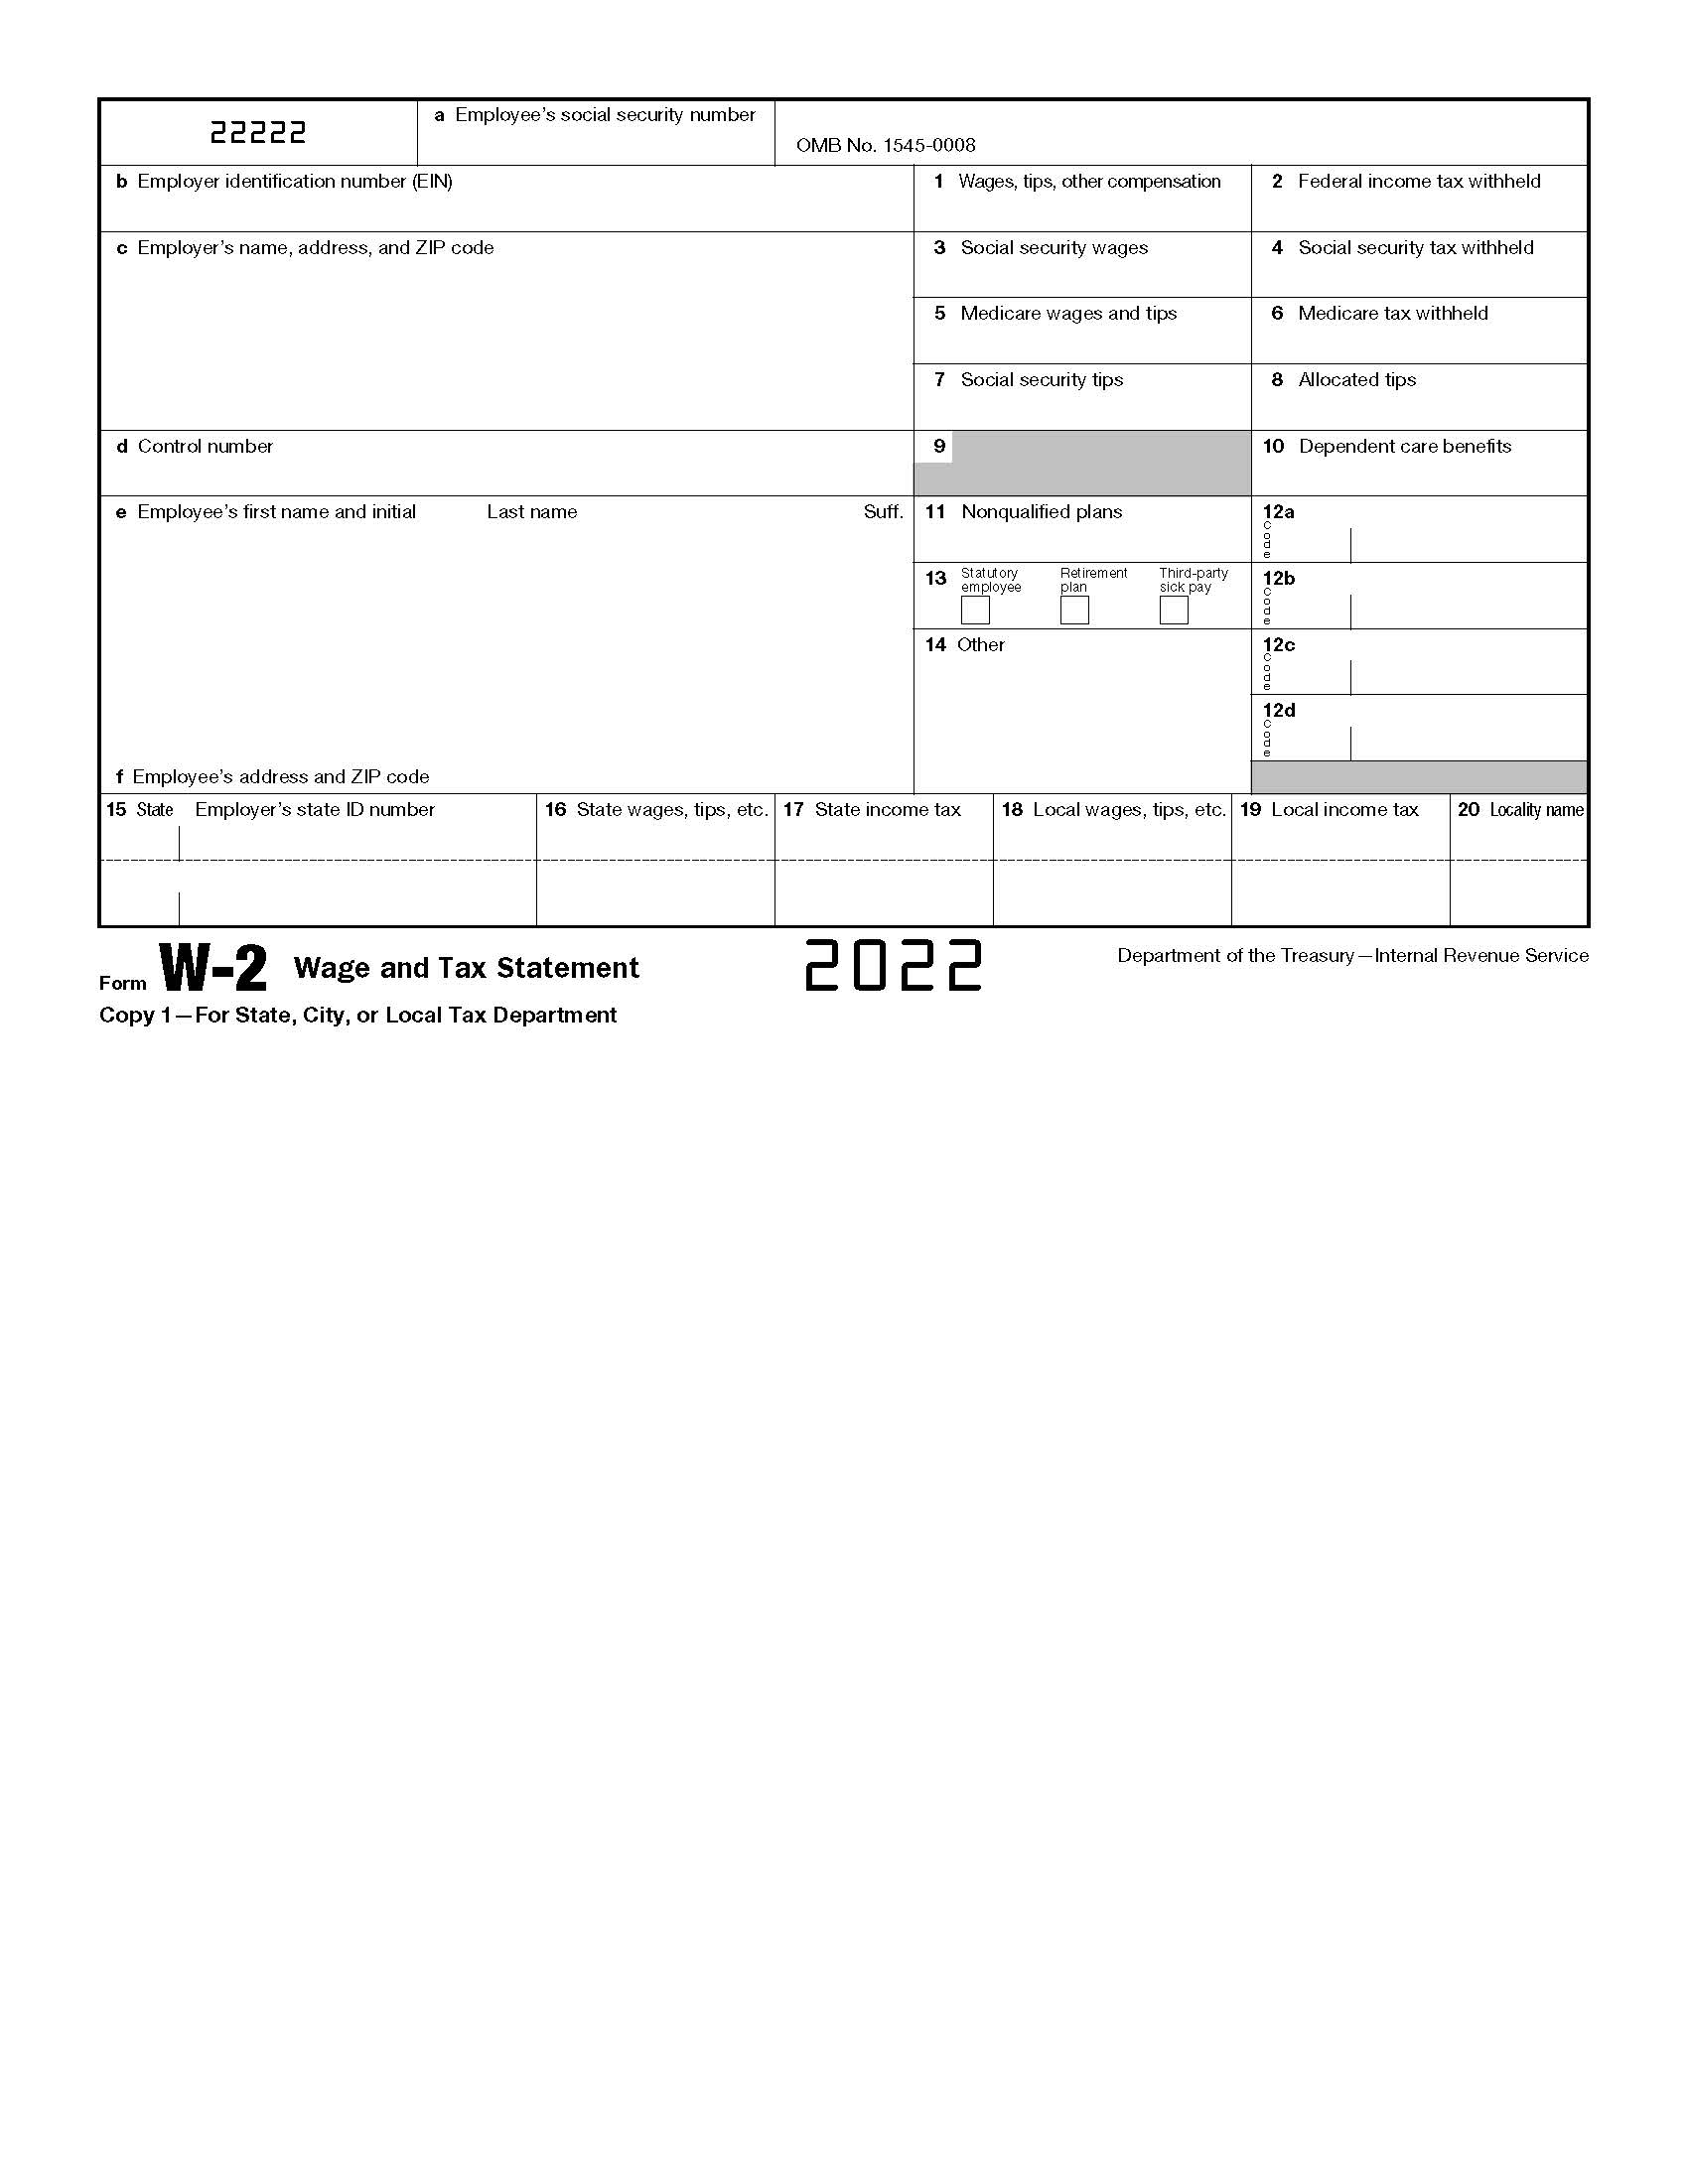 W-2 Form 2022 - A Complete Guide to Wage and Tax Statements_Page_03